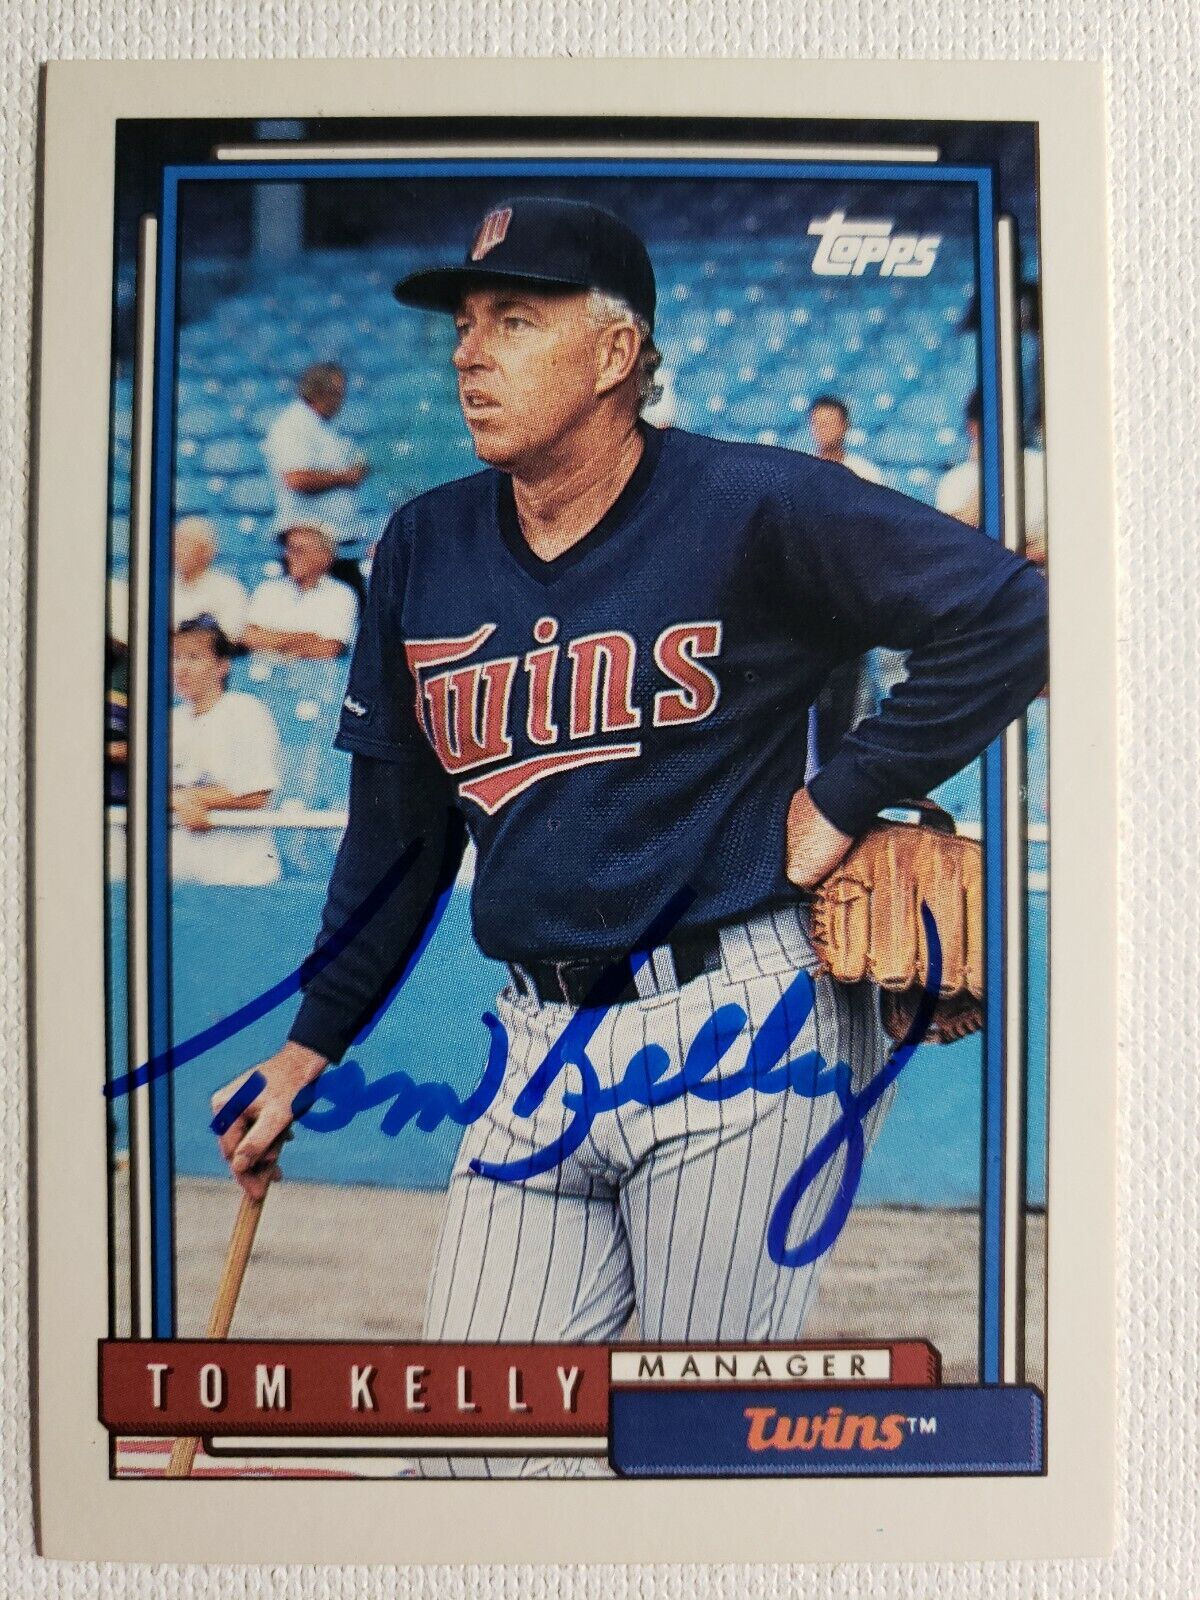 1992 Topps Tom Kelly Auto Autograph Signed Card Twins #459 HOF?